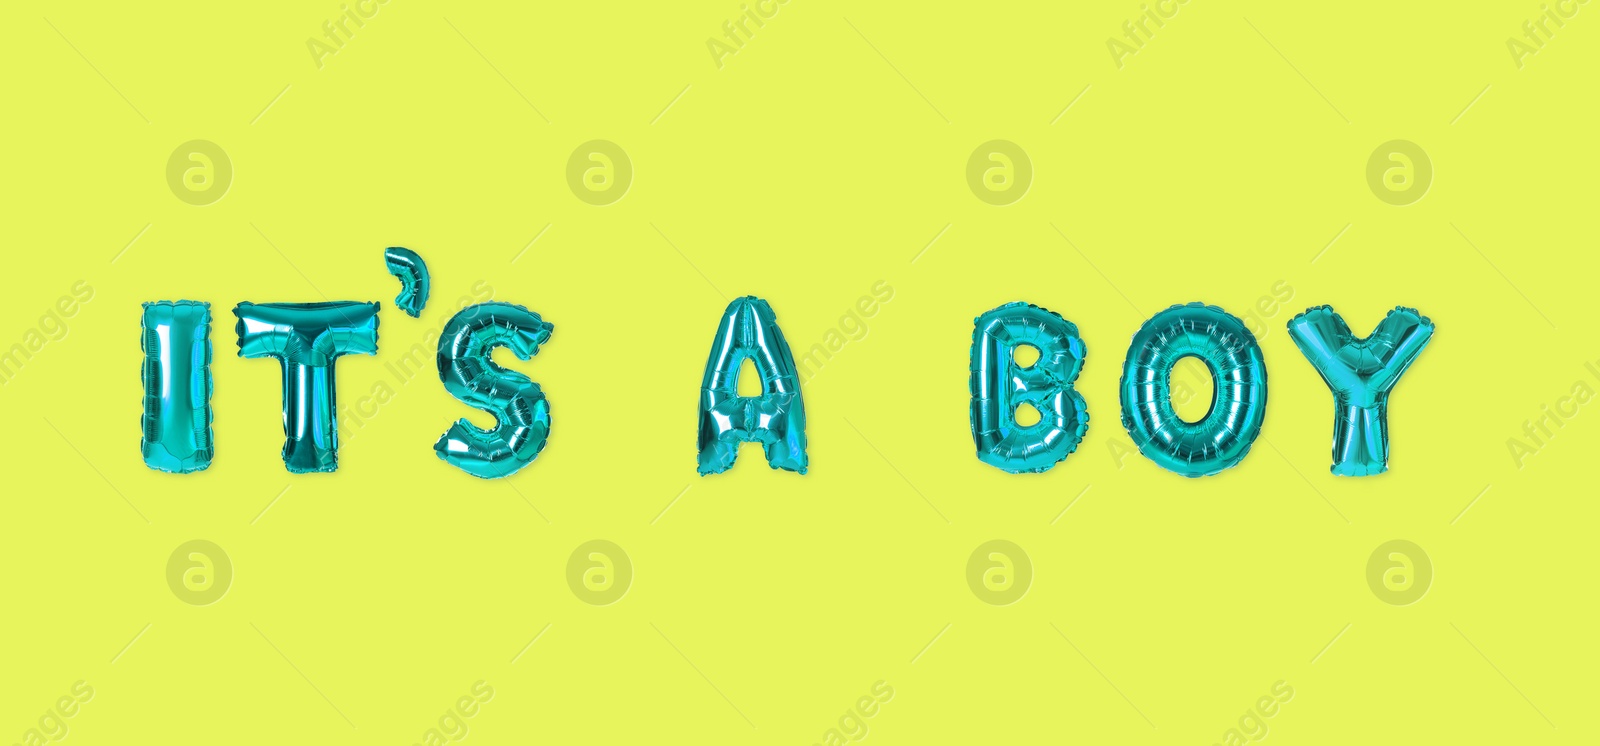 Image of Phrase ITS A BOY made of foil balloon letters on yellow background, banner design. Baby shower party